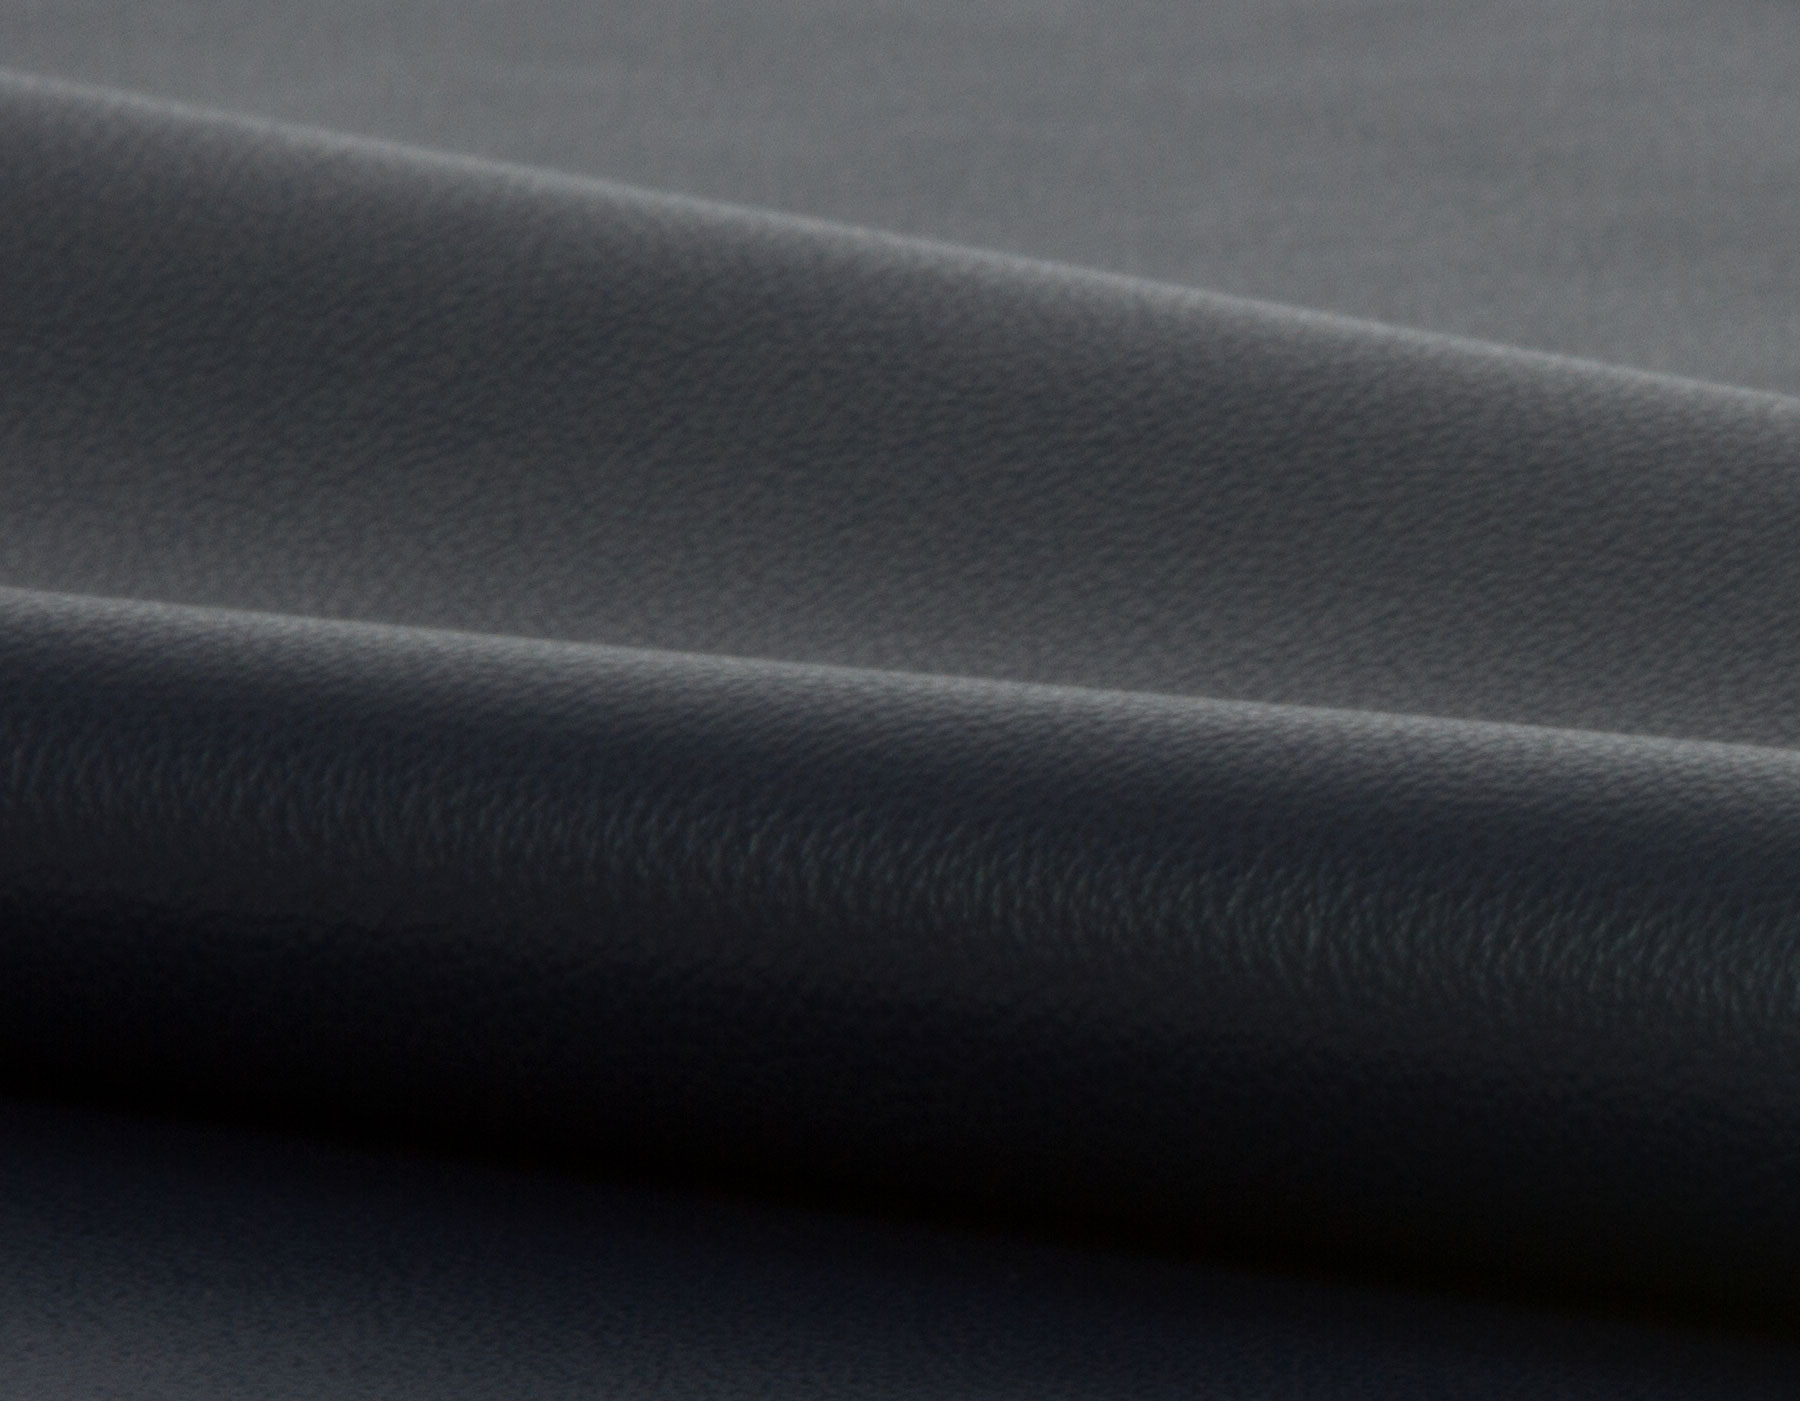 Genuine Leather Upholstery Fabric, Black Leather For Upholstery